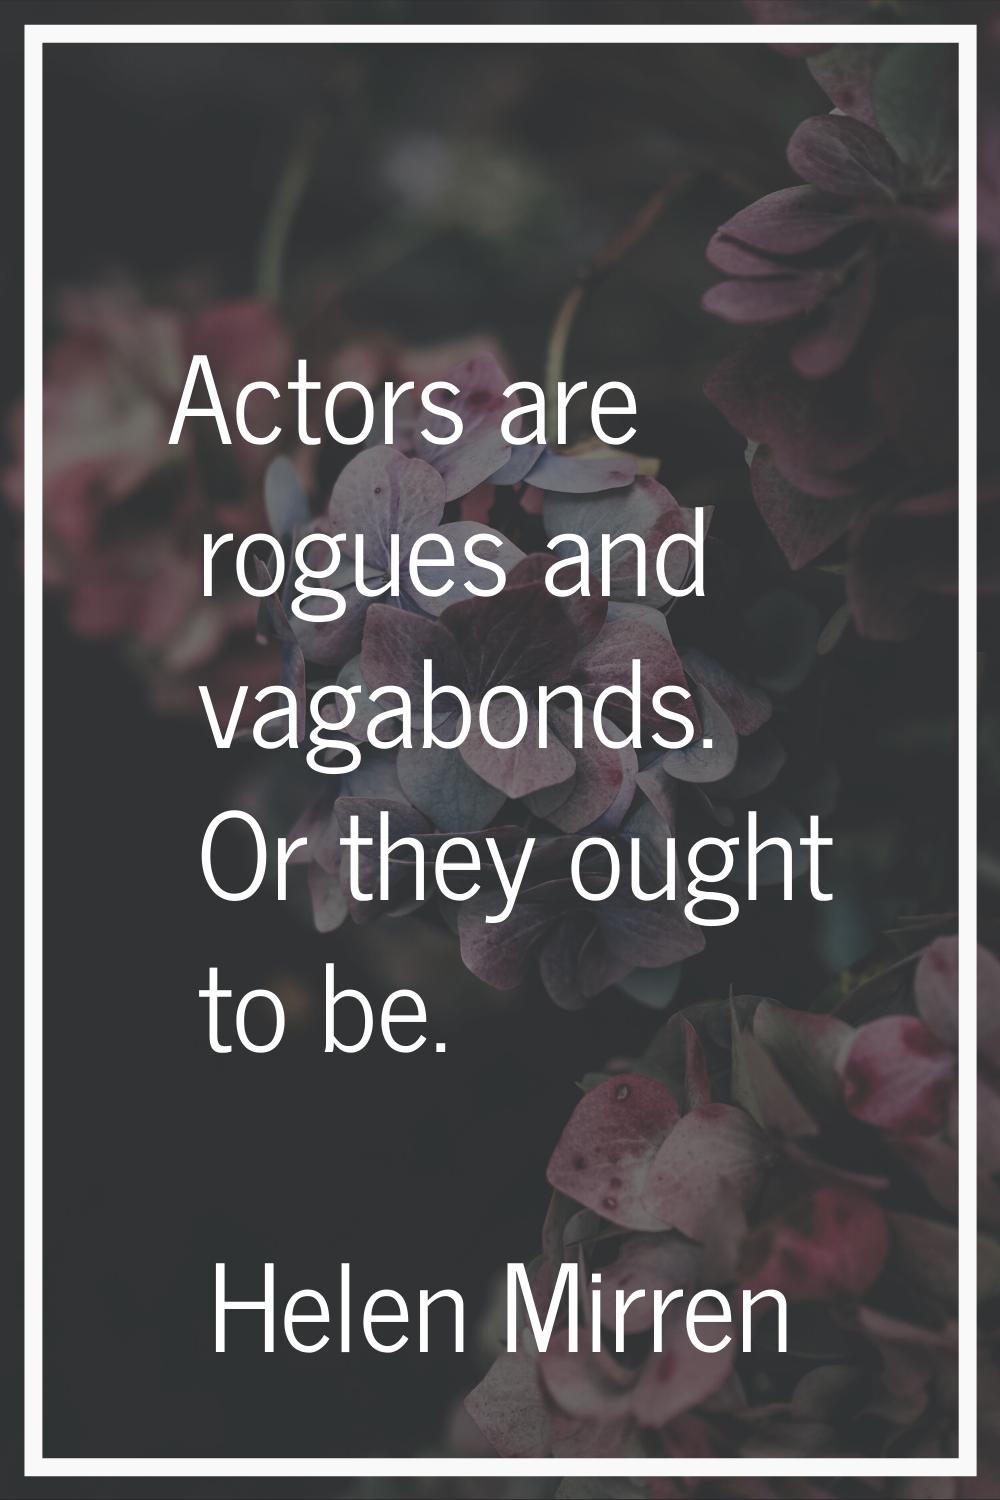 Actors are rogues and vagabonds. Or they ought to be.